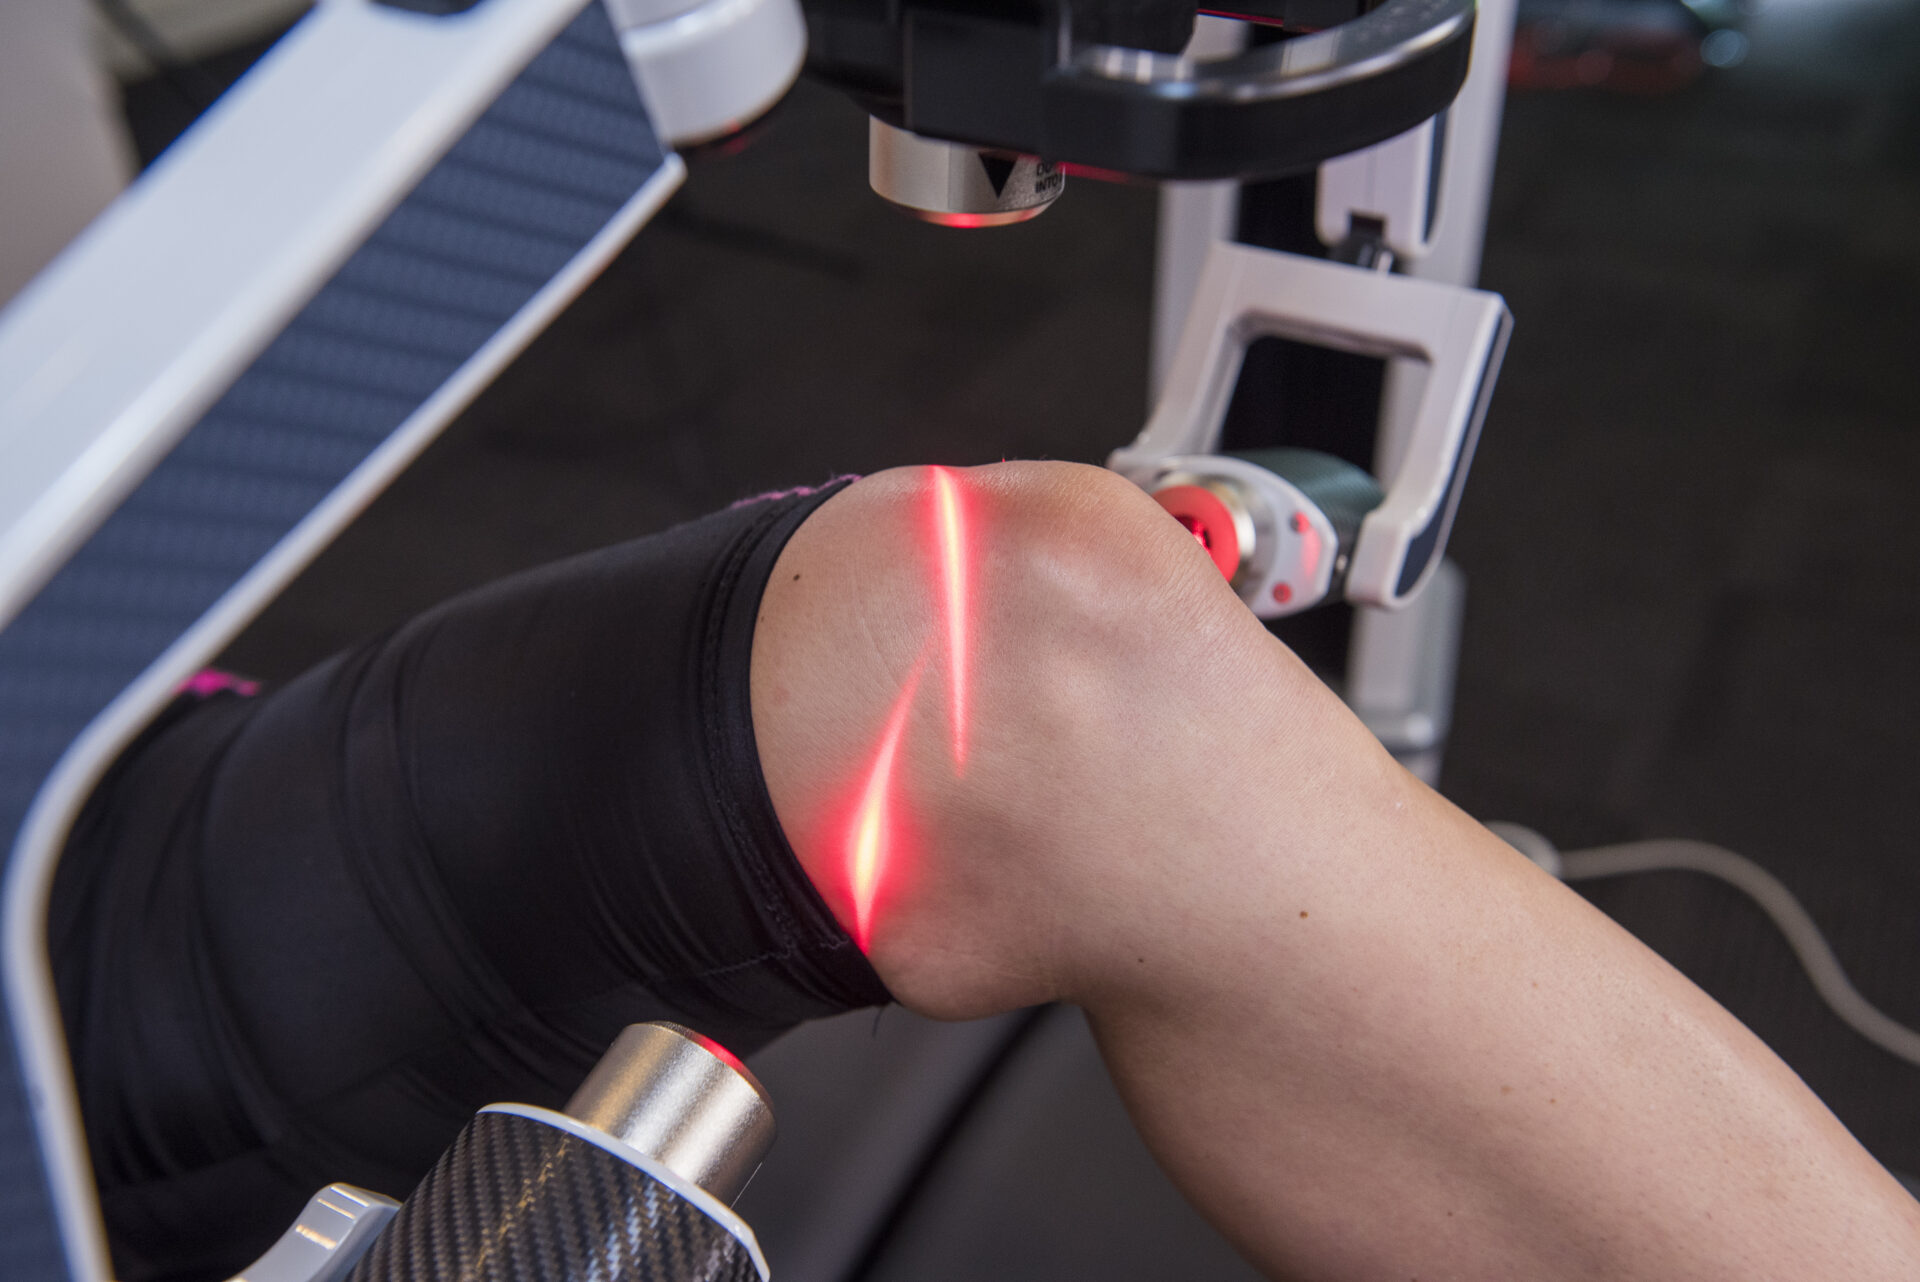 FX635 laser being used on a person's knee